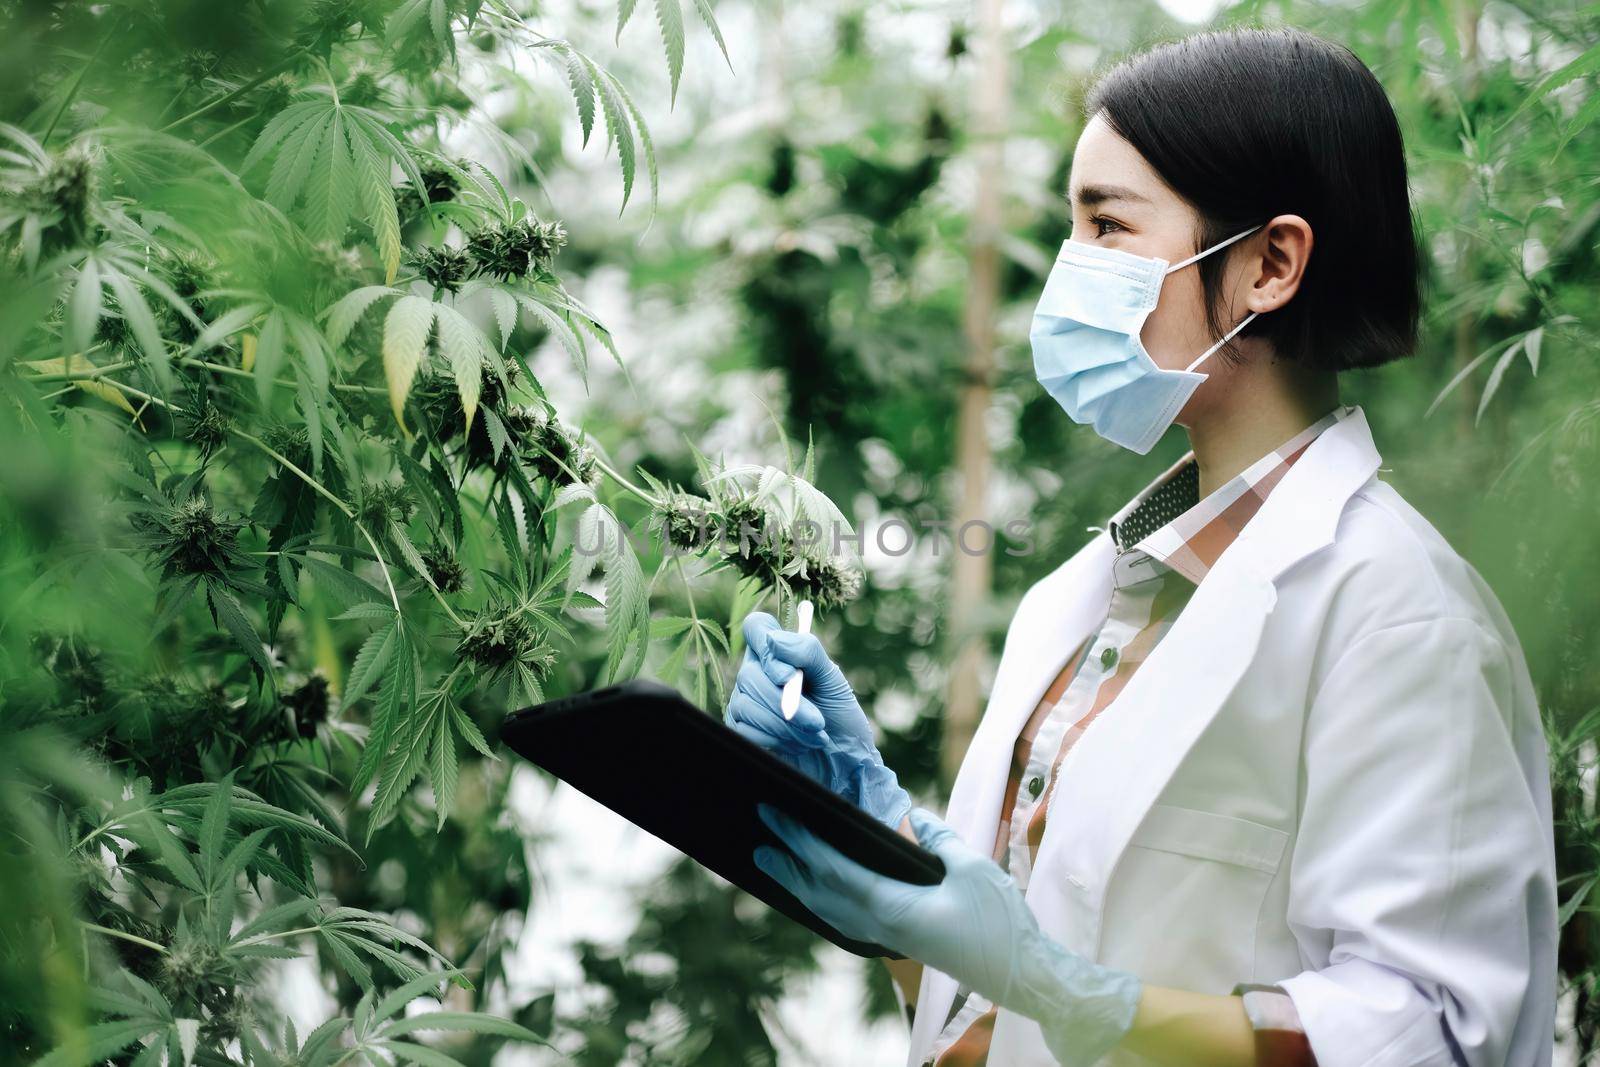 An Asian woman Agriculturist, Researcher, Farmer or Gardener recording cannabis cultivation data on a tablet to improve quality, under the soft of sunlight. by wichayada